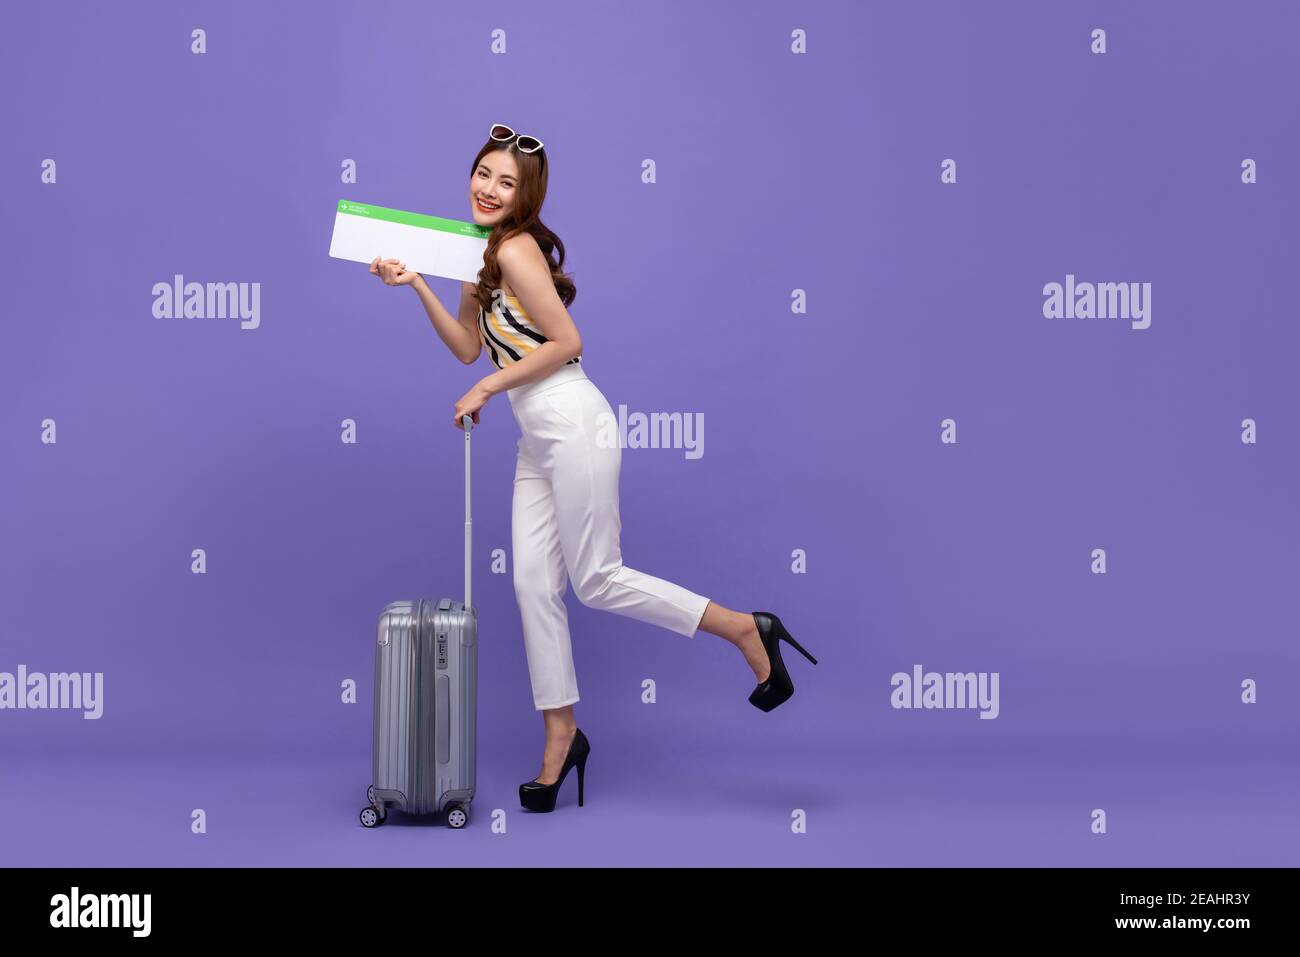 Young pretty Asian woman tourist looking happy and excited smiling and walking with luggage and holding plane ticket isolated on purple background for Stock Photo